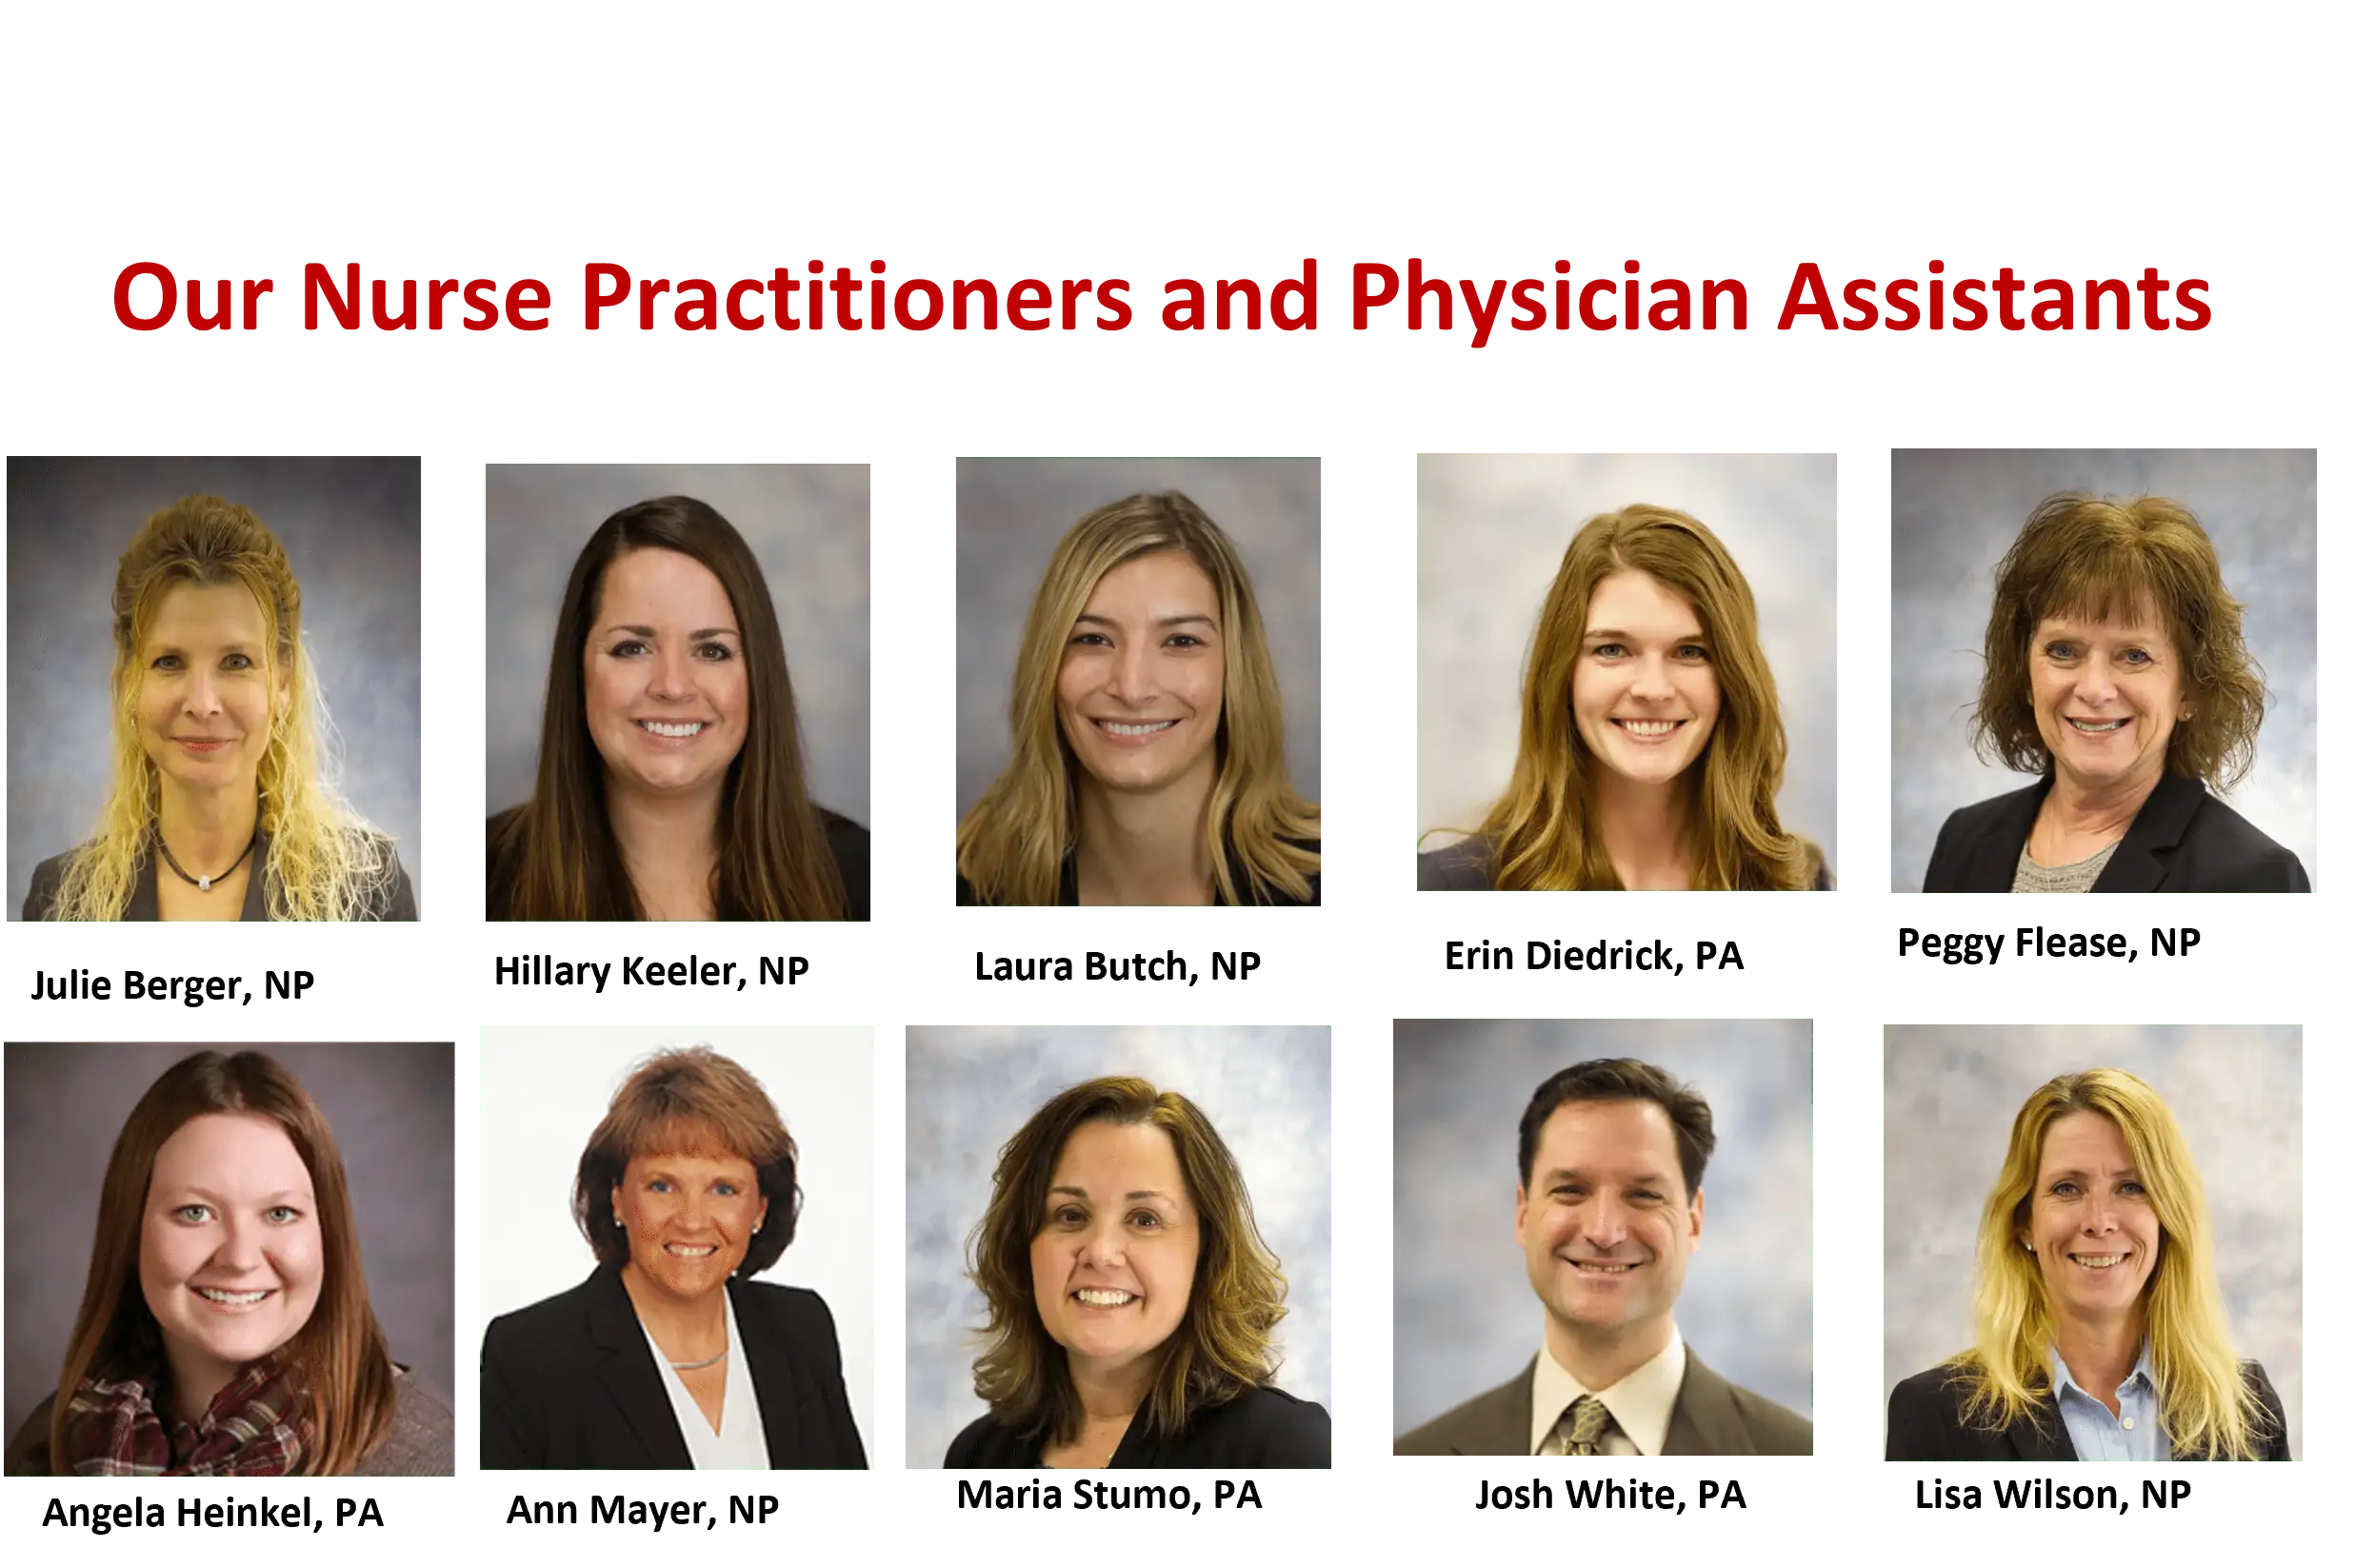 Photos-of-HVI-Nurse-Practitioners-and-Physician-Assistants